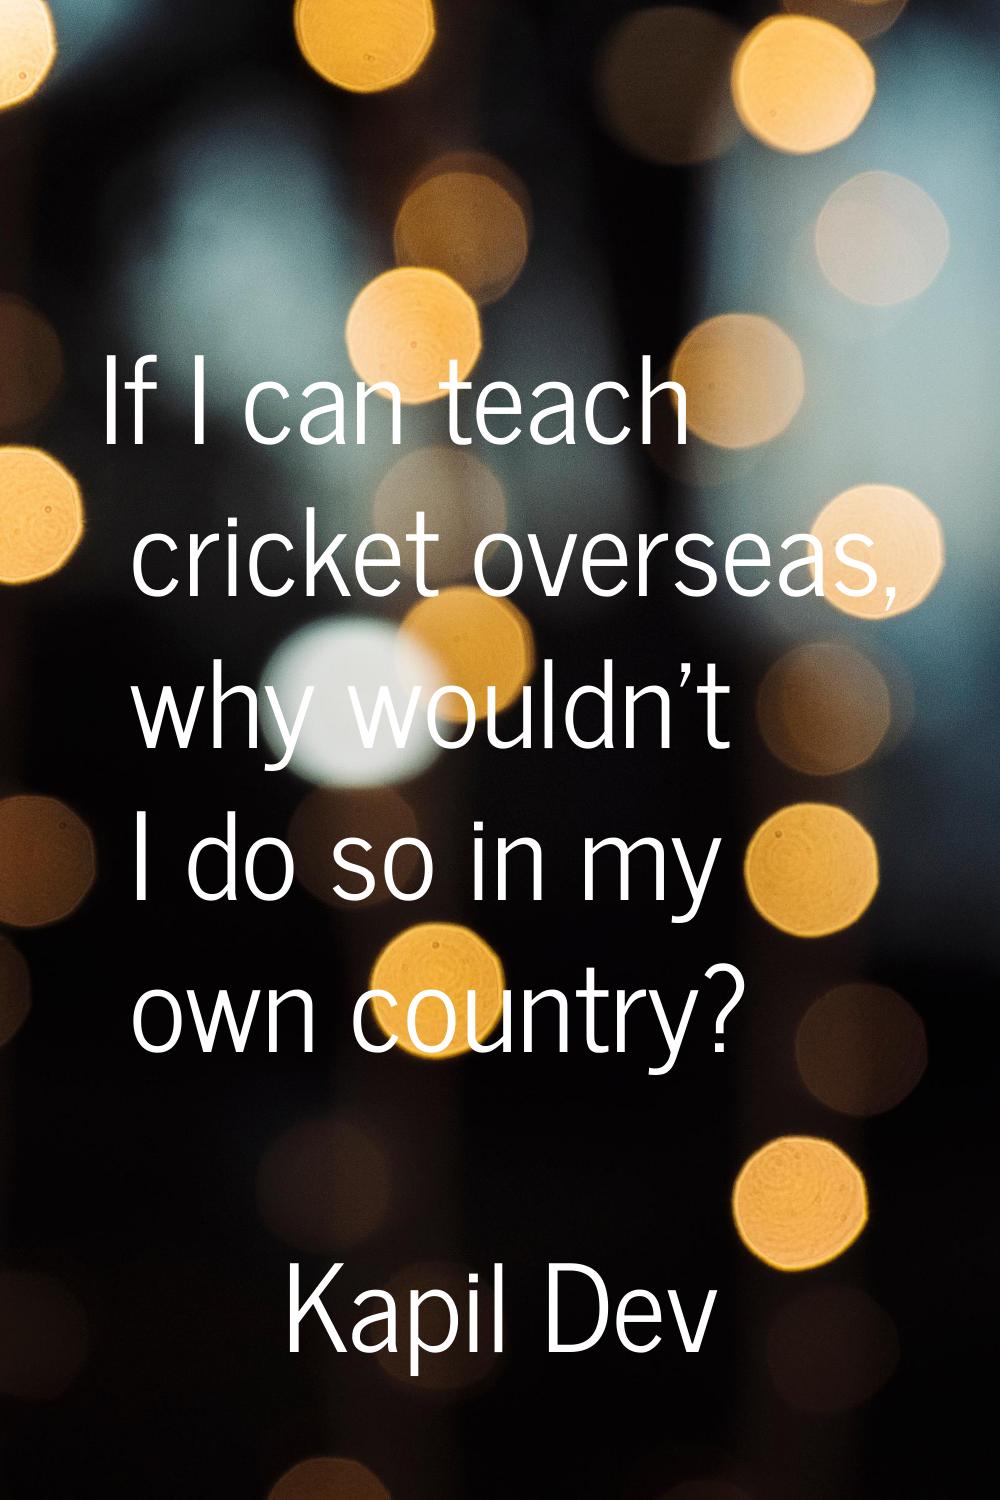 If I can teach cricket overseas, why wouldn't I do so in my own country?